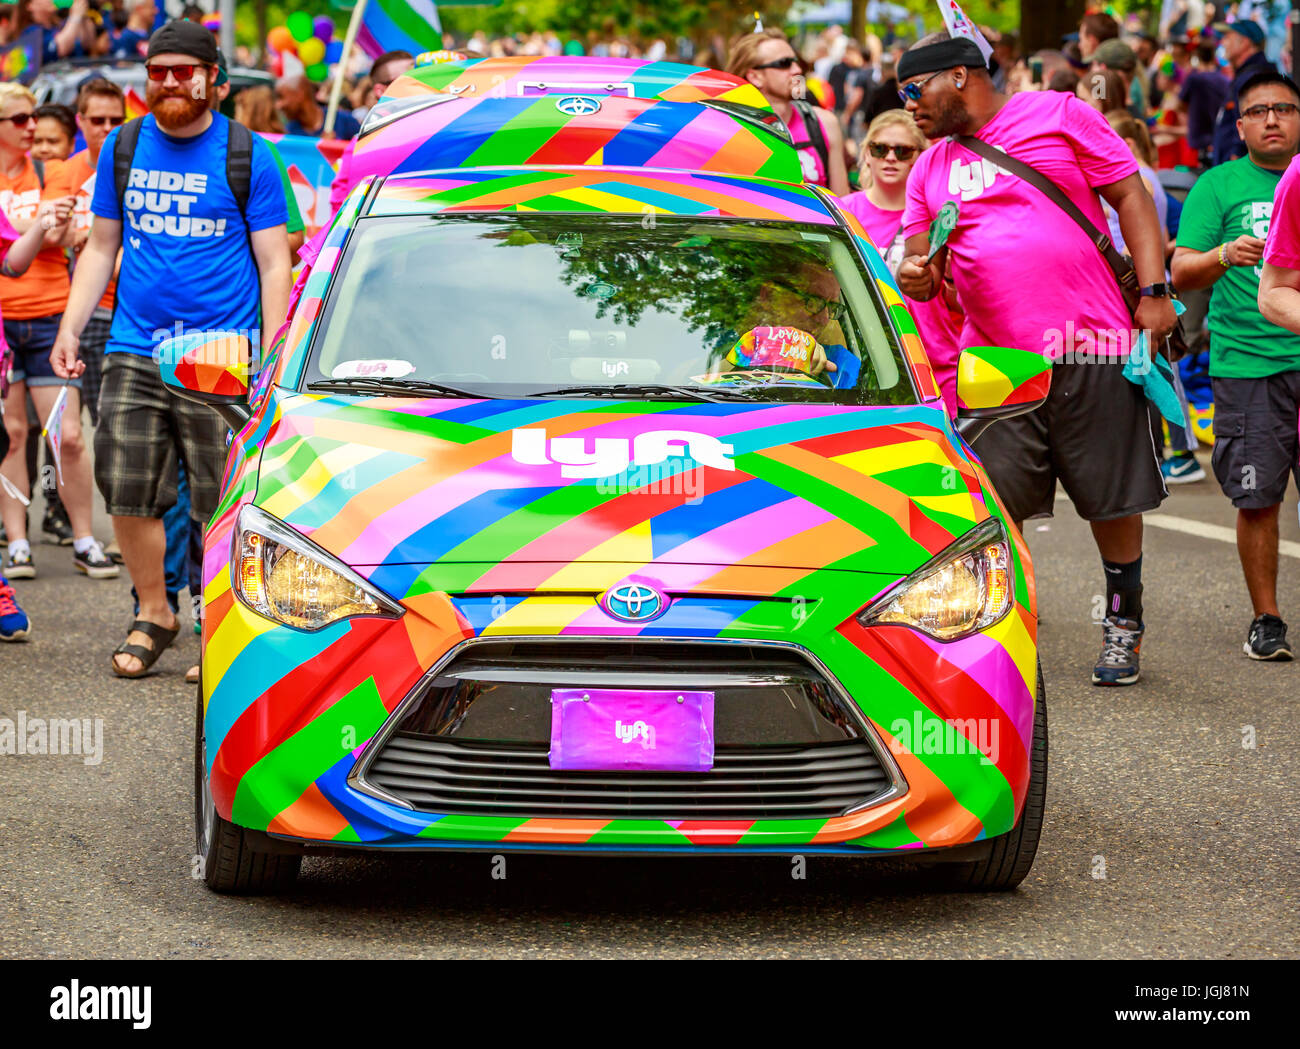 Portland, Oregon, USA - June 18, 2017: Lyft in Portland's 2017 Pride Parade, which reflects the community diversity. Stock Photo